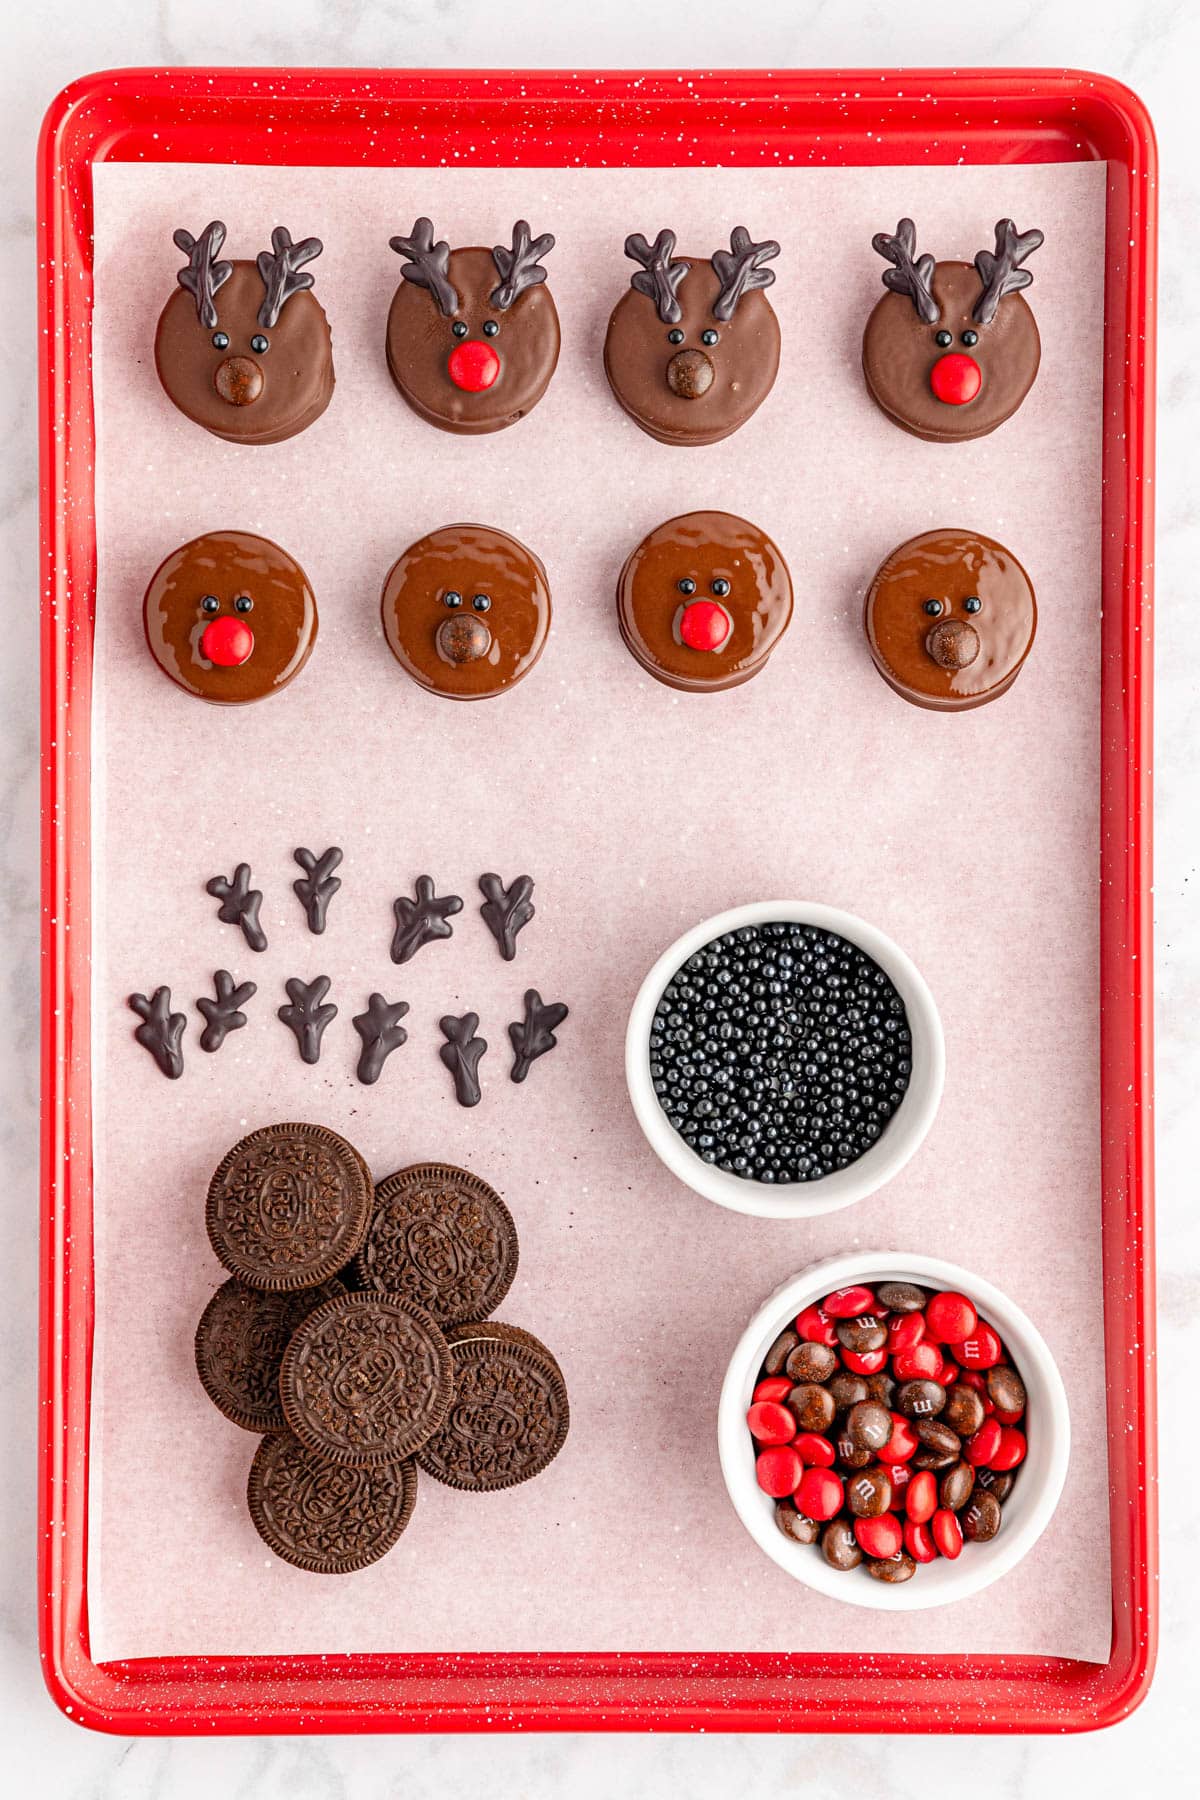 A tray of chocolate reindeer cookies and oreos.